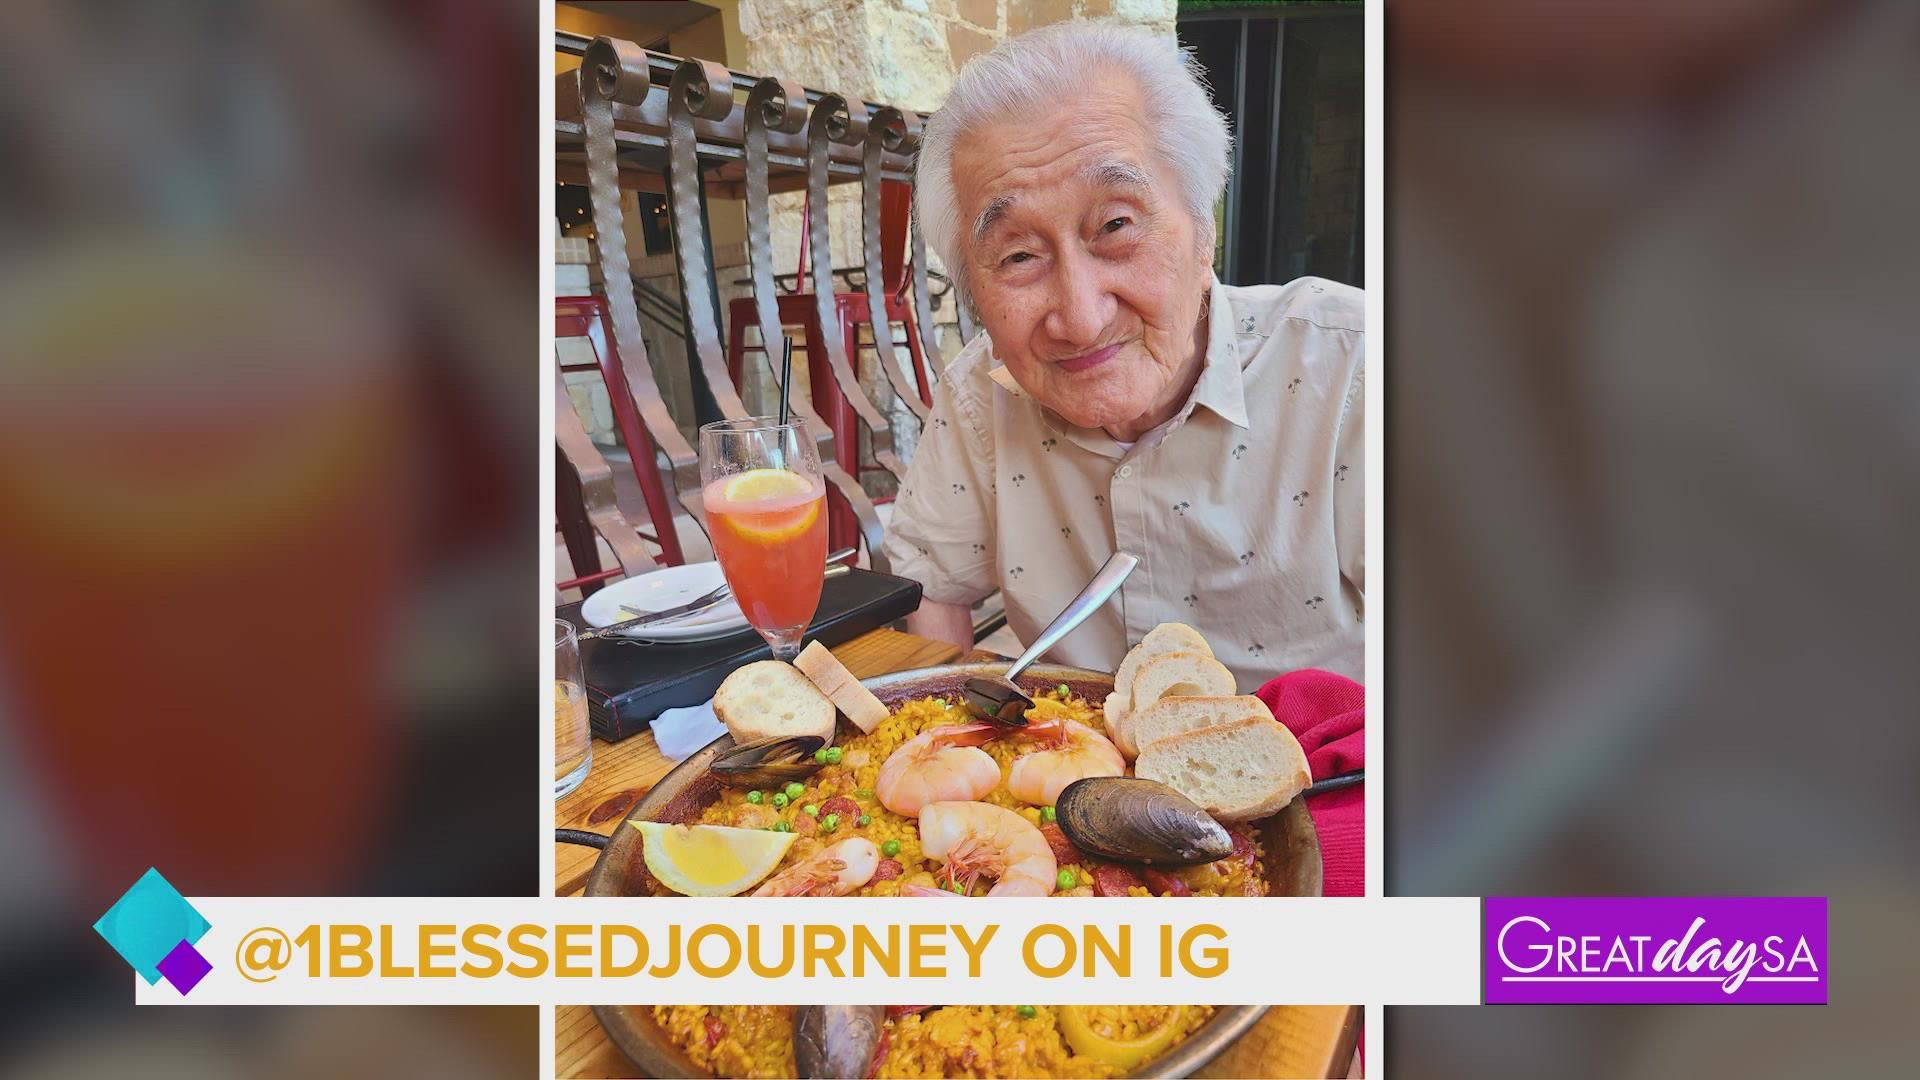 A food journey between a father and daughter turned into an internet sensation filled with love